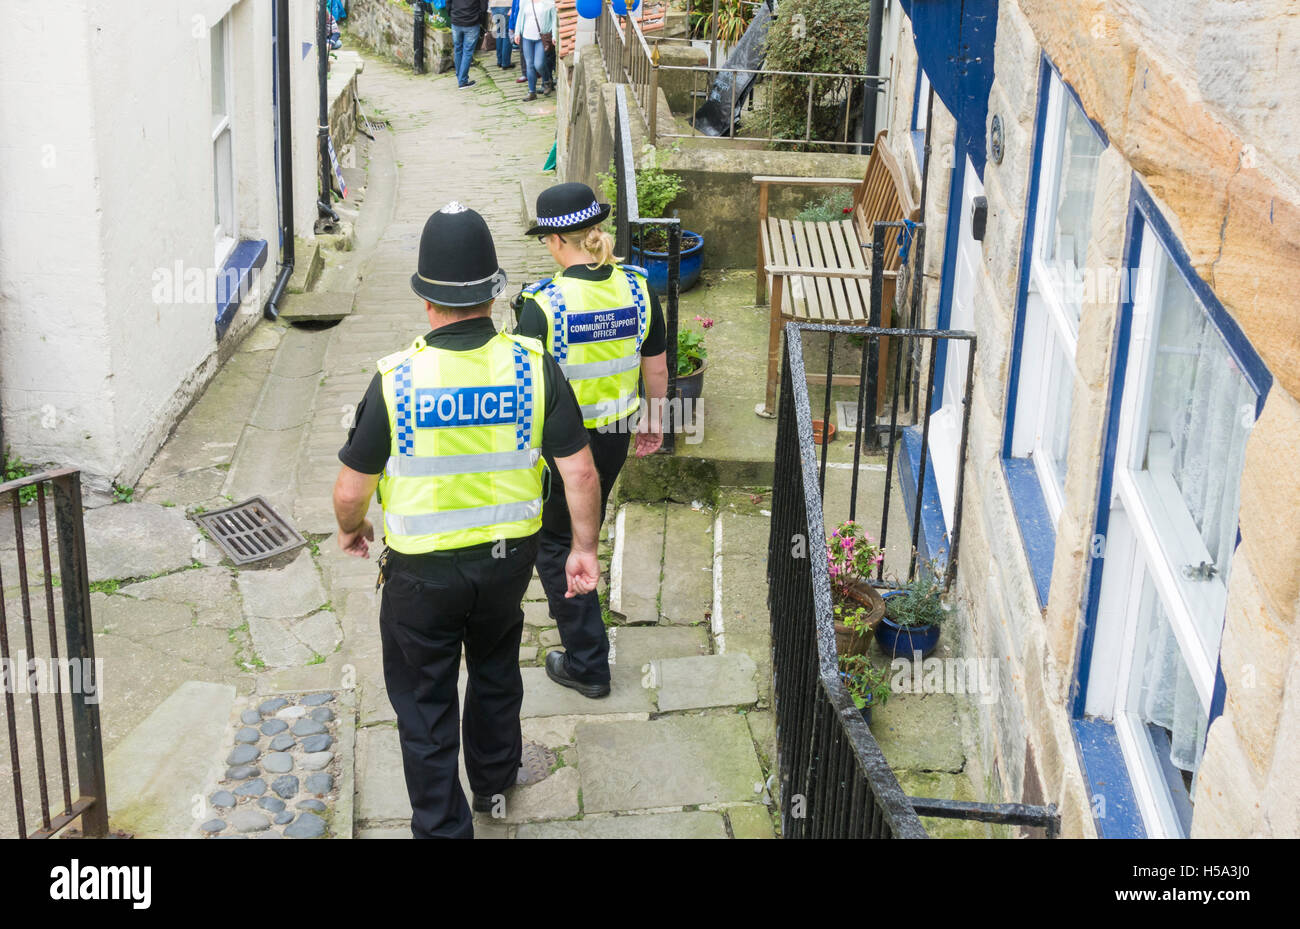 Male policeman and female police support community officer in village street in England. UK Stock Photo